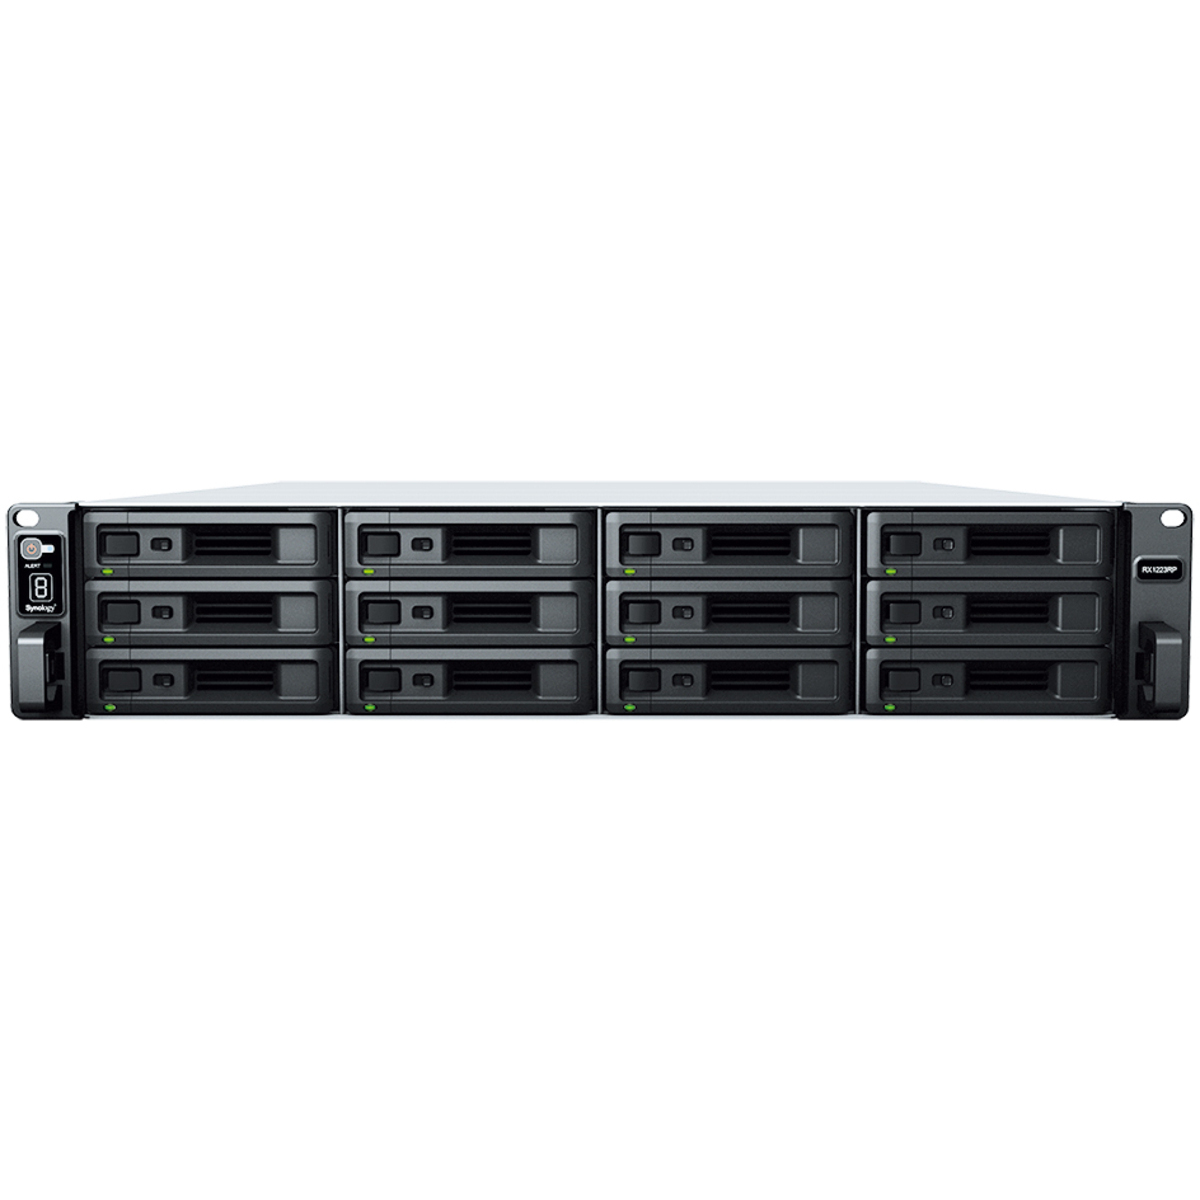 Synology RX1223RP External Expansion Drive 160tb 12-Bay RackMount Large Business / Enterprise Expansion Enclosure 10x16tb Synology HAT5300 Series HAT5300-16T 3.5 7200rpm SATA 6Gb/s HDD ENTERPRISE Class Drives Installed - Burn-In Tested RX1223RP External Expansion Drive